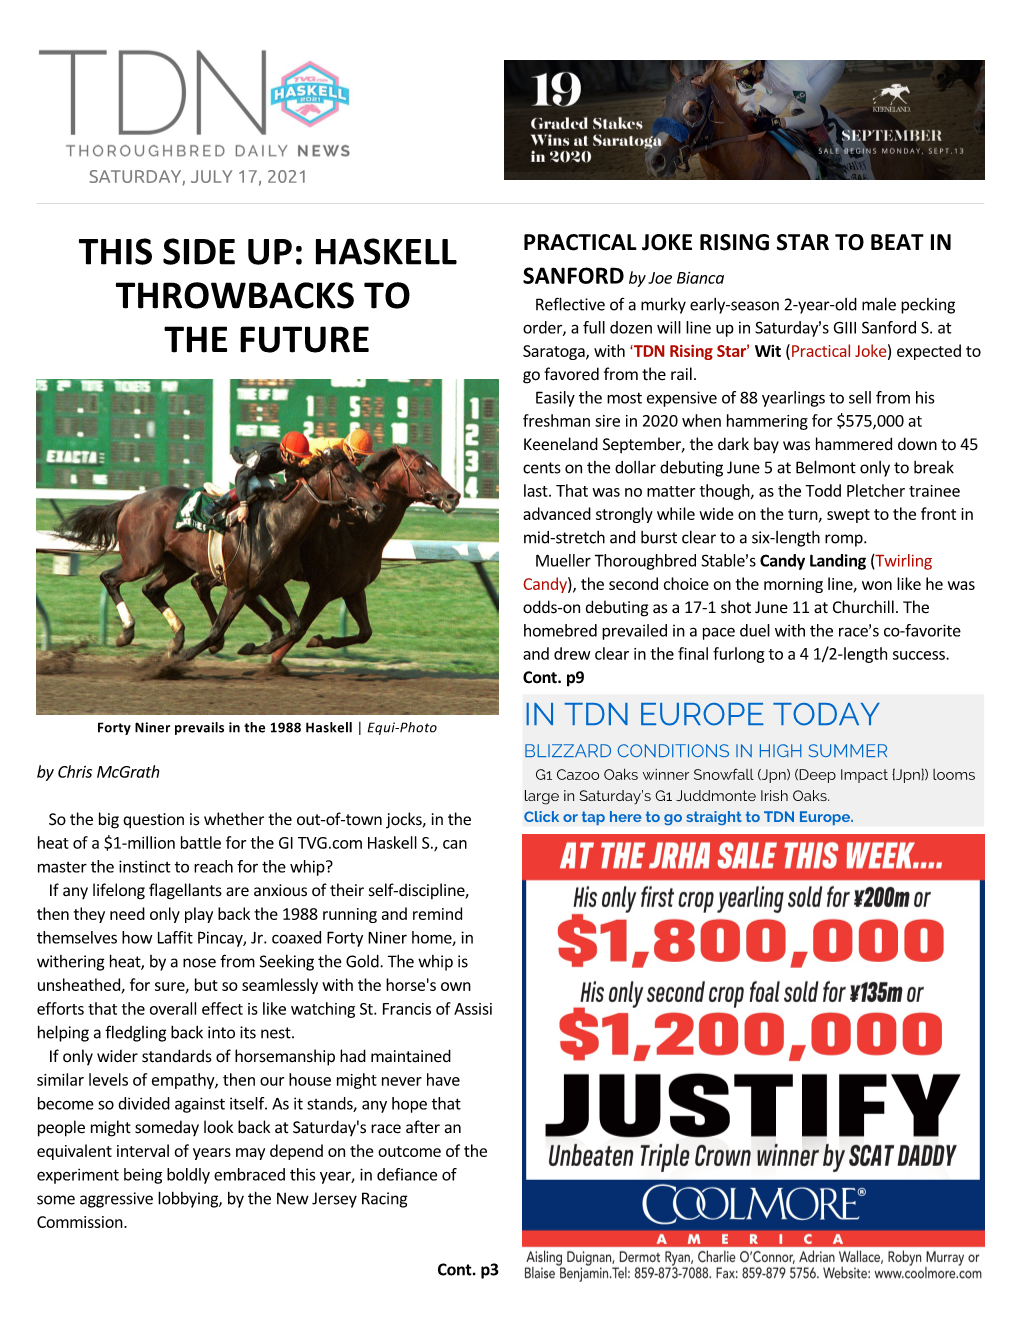 TDN AMERICA TODAY Snowfall Would Be Favourite for This Based Solely on Her HASKELL THROWBACKS to the FUTURE Emphatic Success in York=S G3 Musidora S